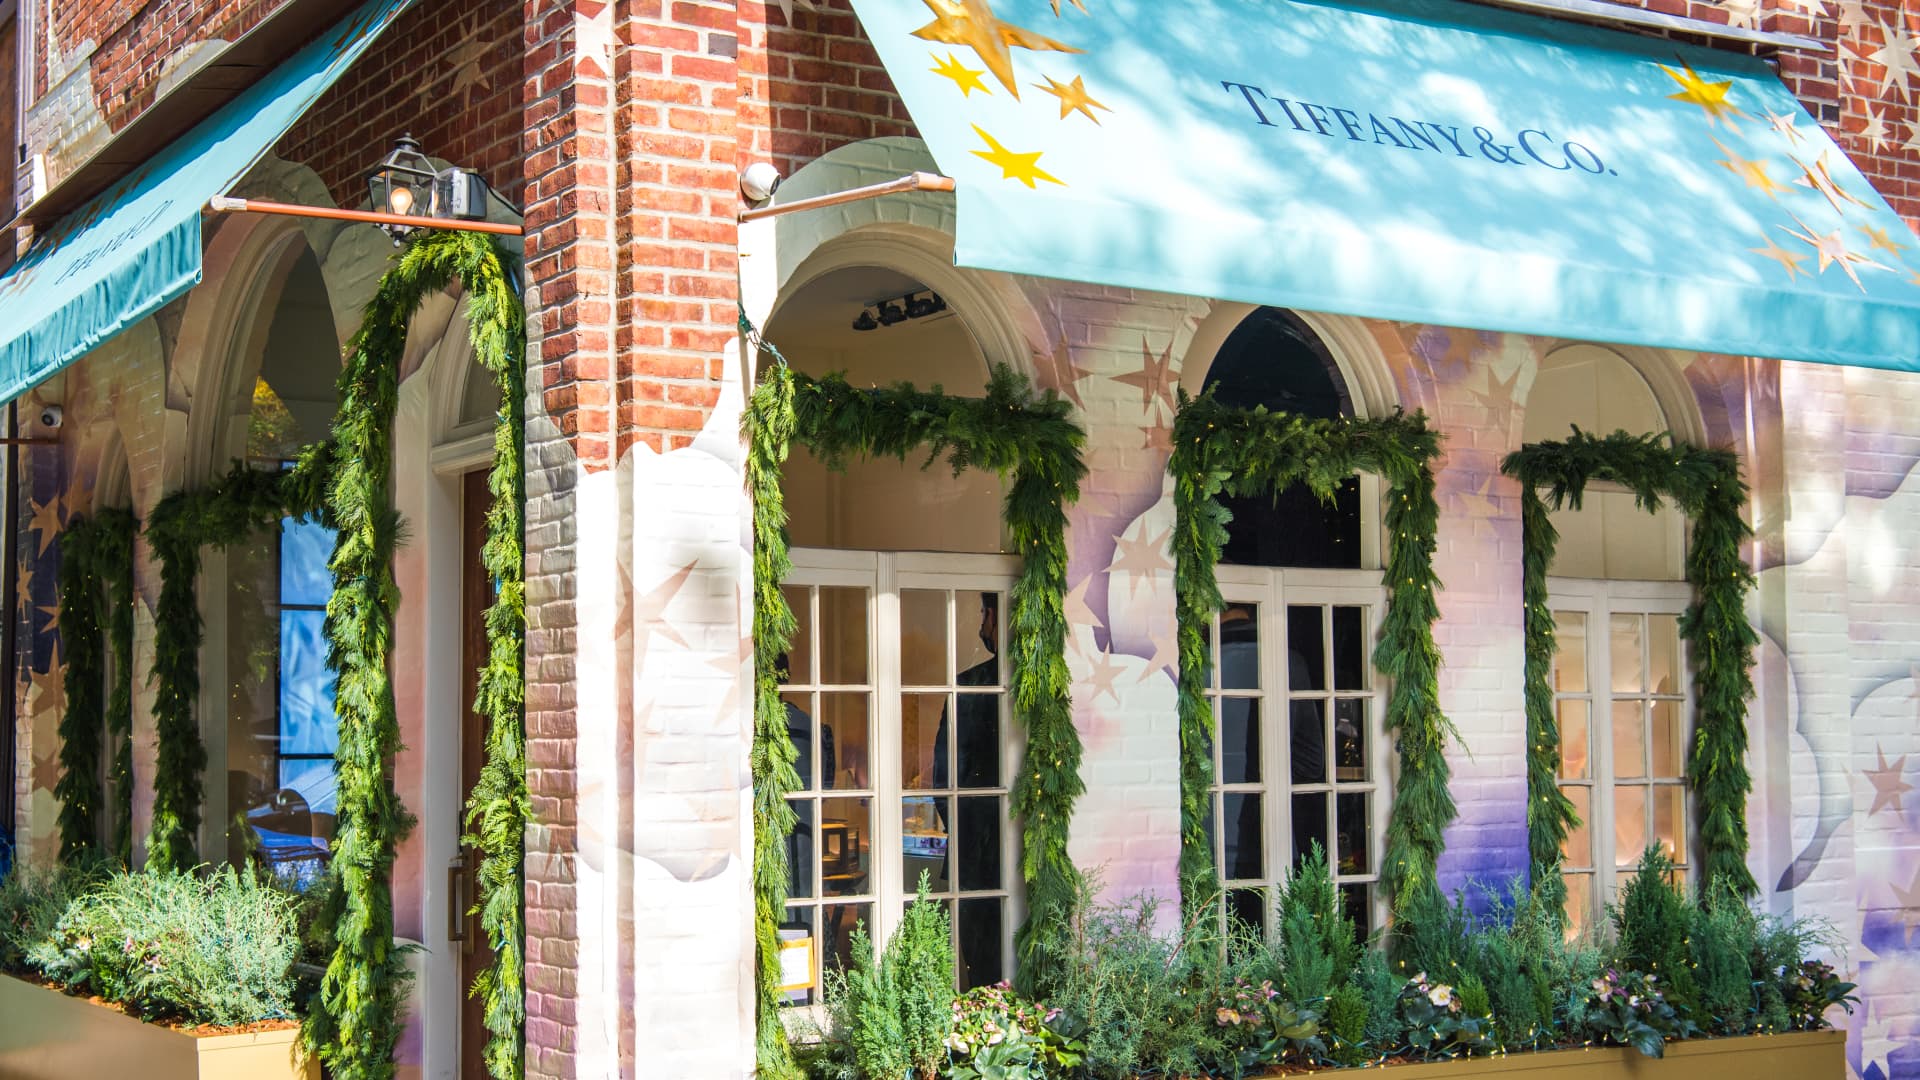 The Tiffany West Village pop-up location is open to the public from Nov. 8 through Jan. 8, 2022.